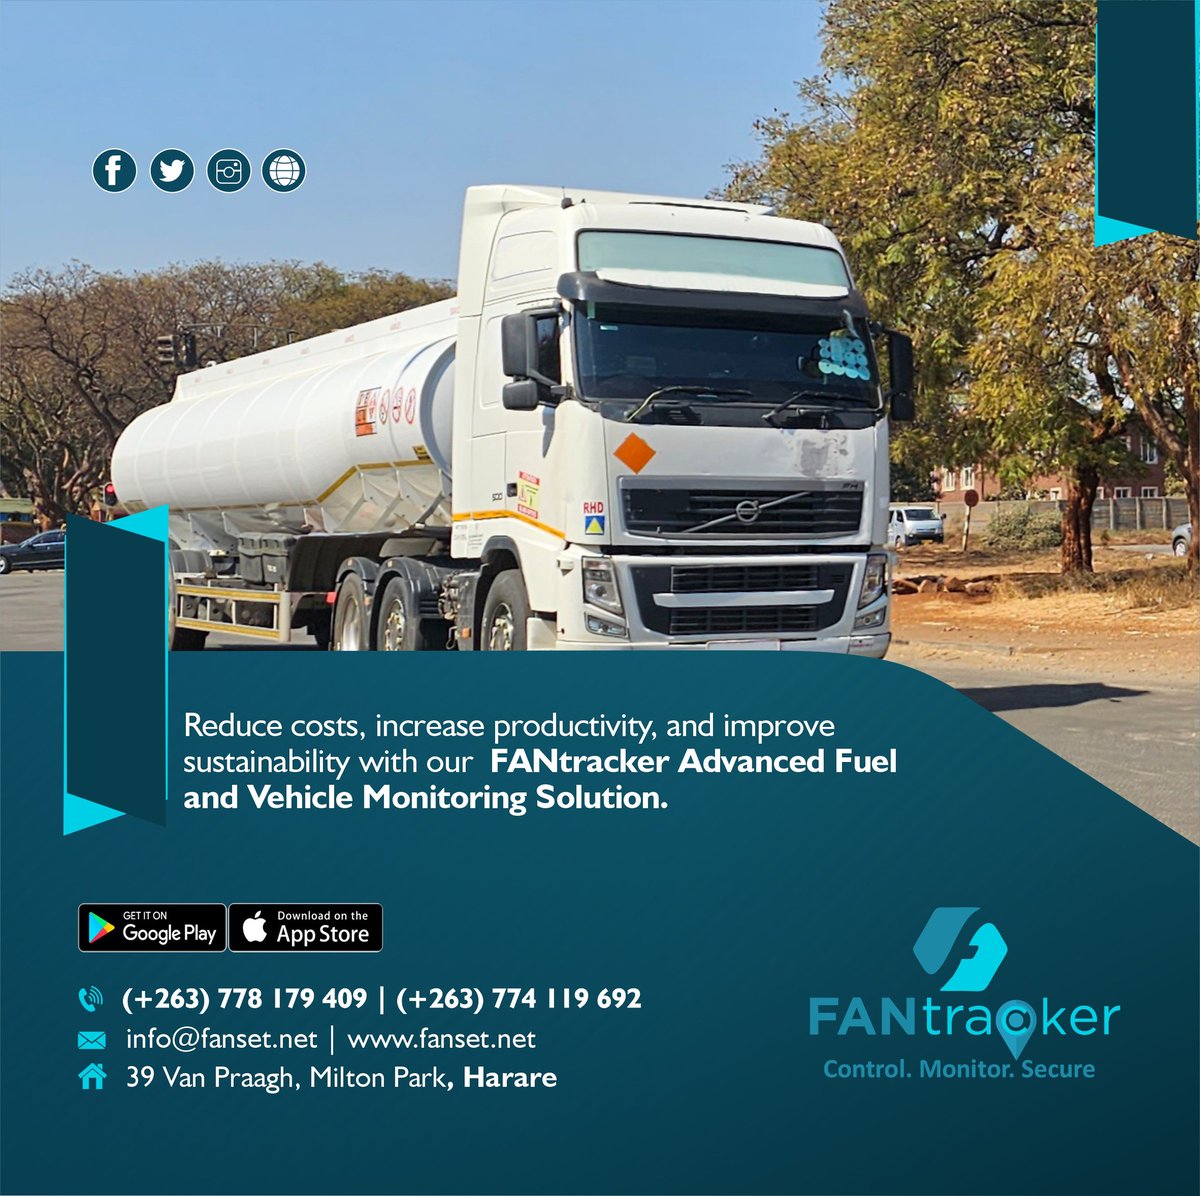 Protect your valuable fuel resources with our advanced fuel theft detection feature. FANtracker monitors fuel levels and detects any suspicious activity, providing you with immediate alerts to prevent losses and unauthorized fuel usage.
Contact : +263778179409/ 0774119692